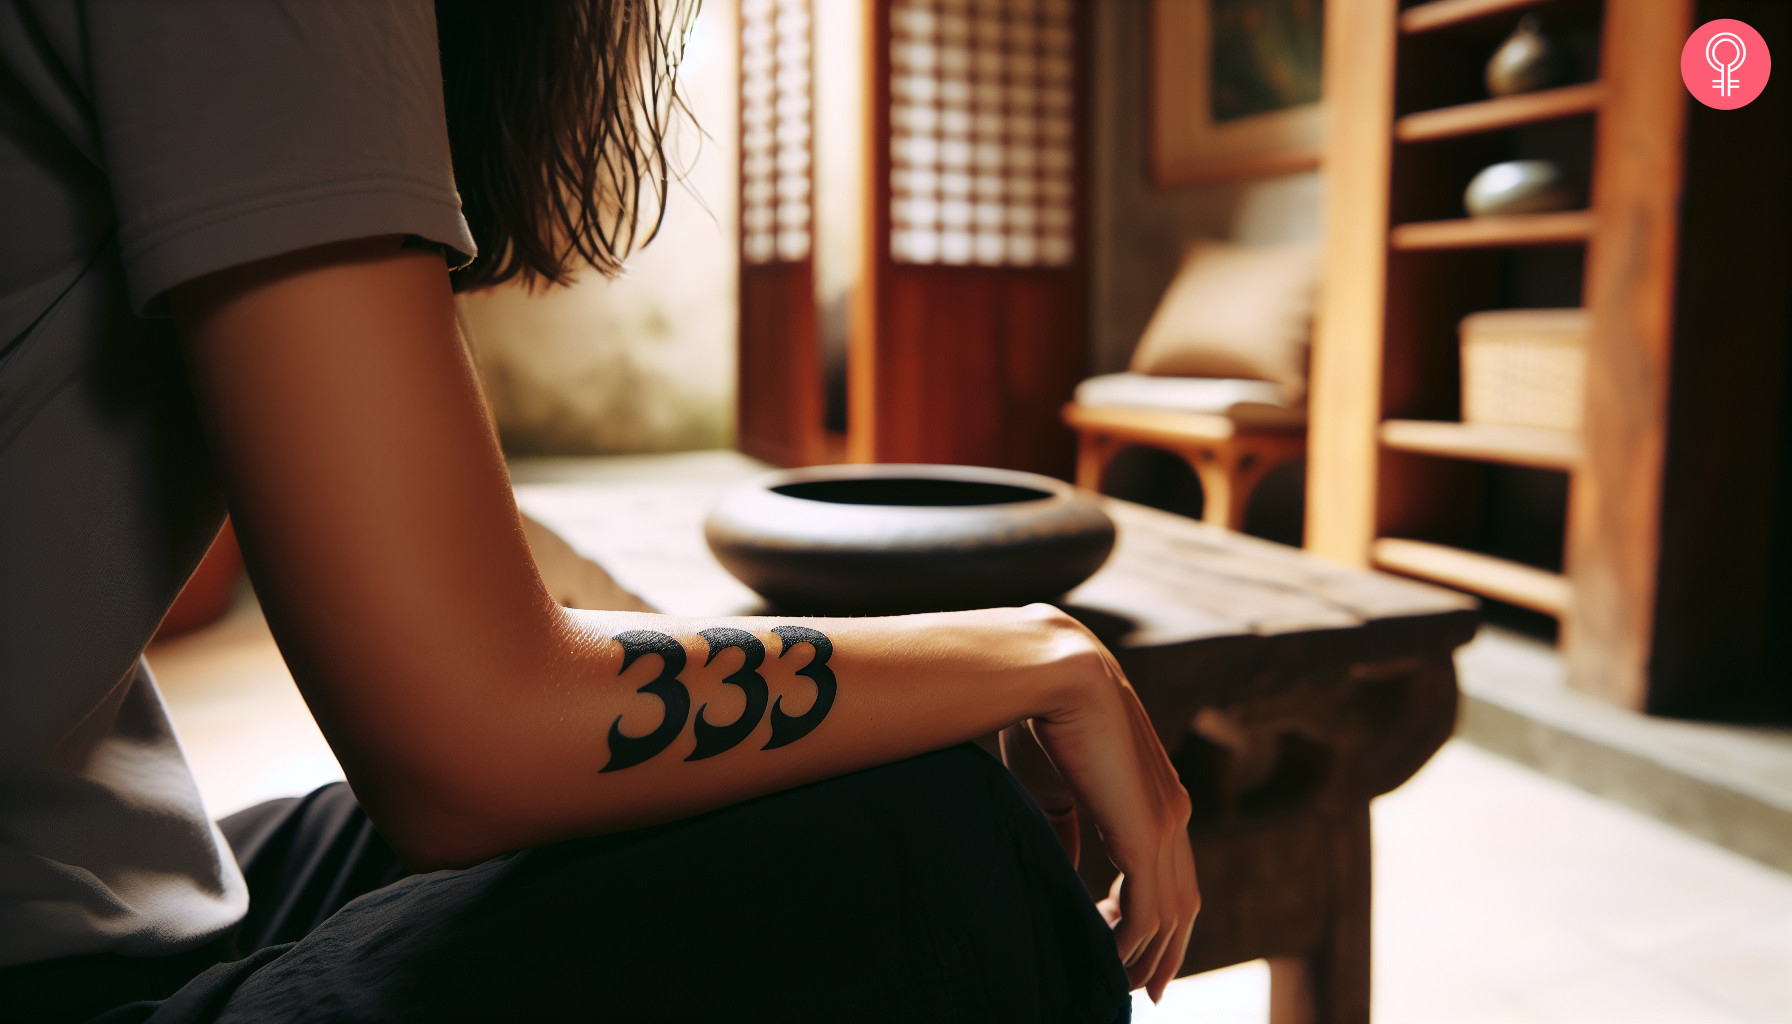 A 333 angel number tattoo on the arm of a woman